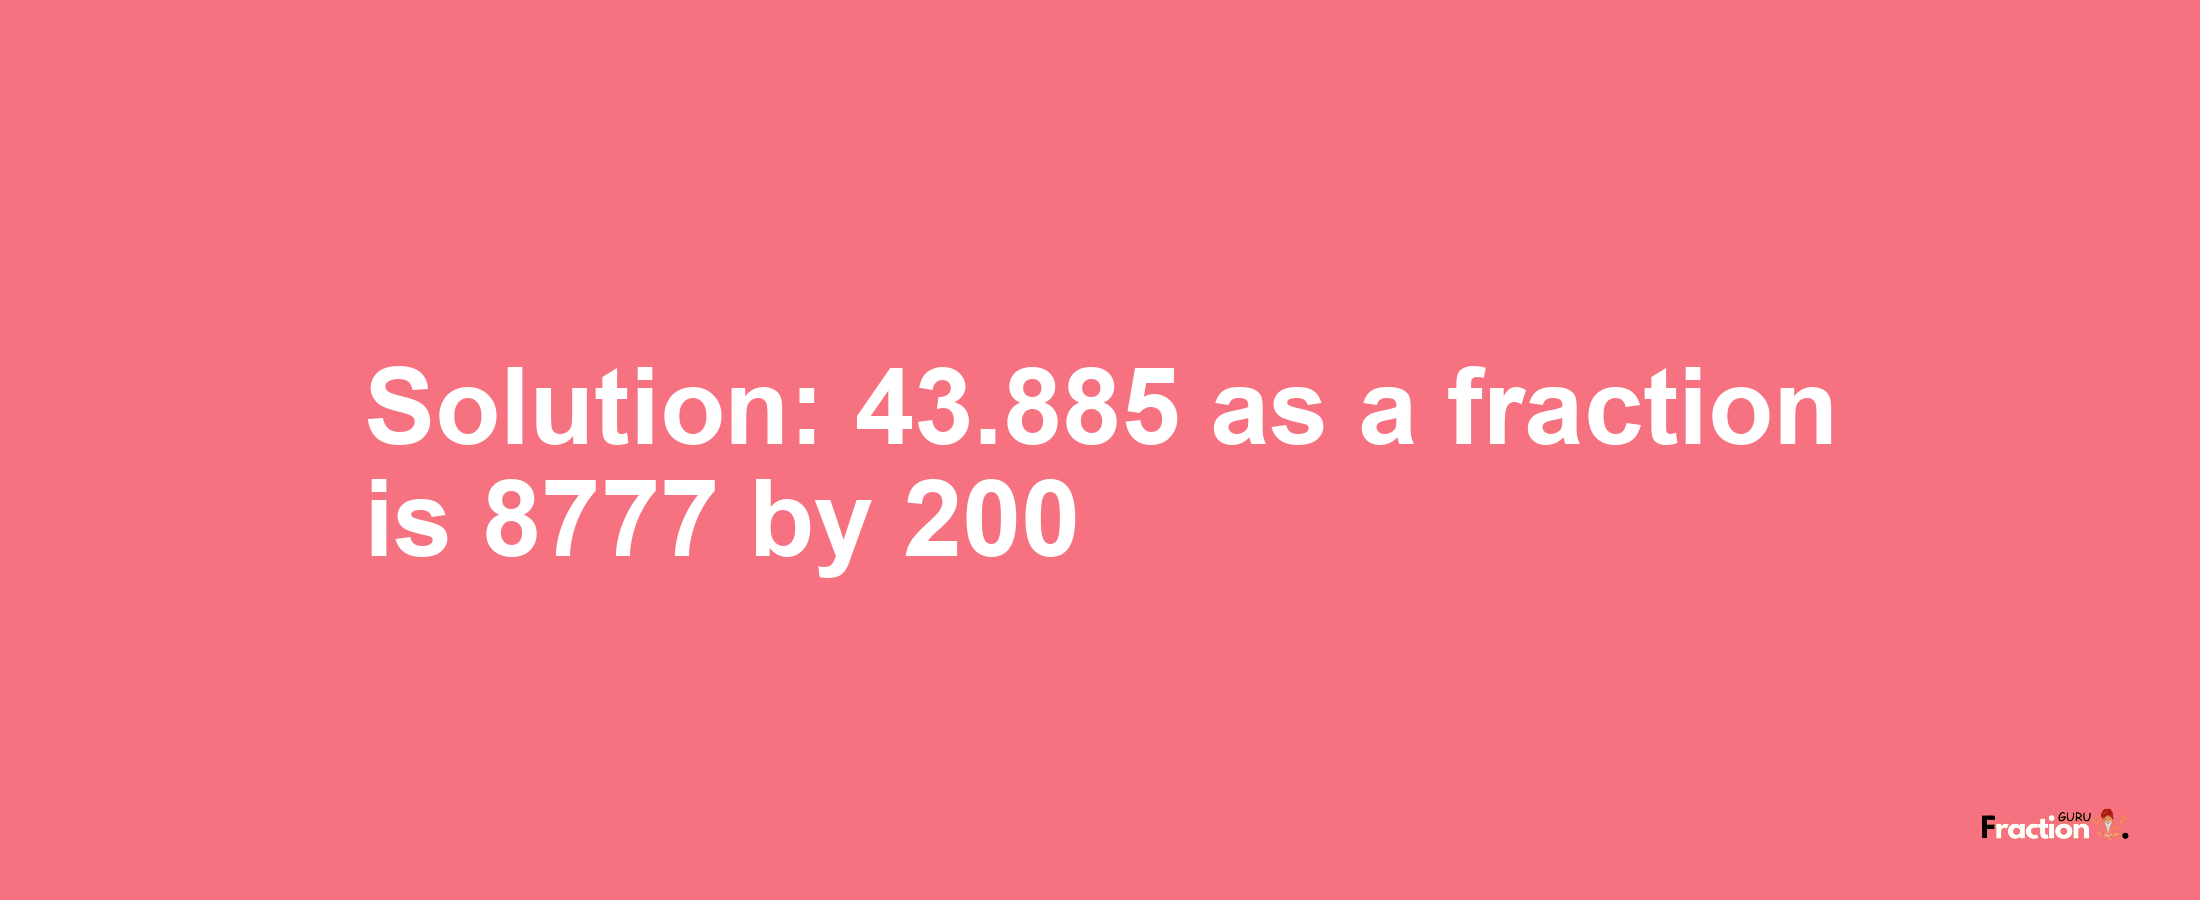 Solution:43.885 as a fraction is 8777/200